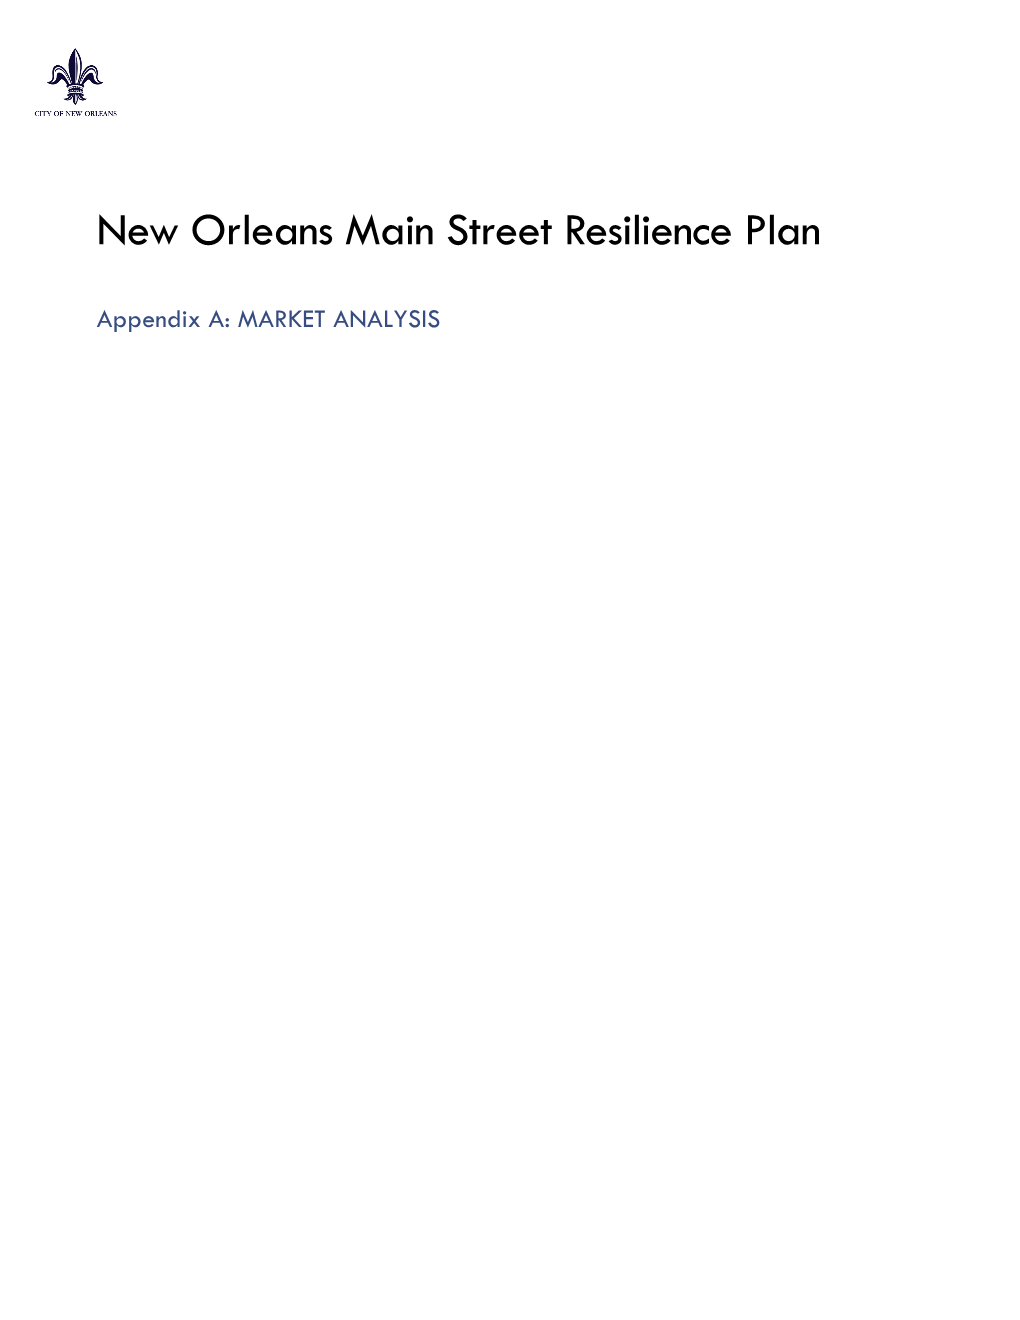 New Orleans Main Street Resilience Plan